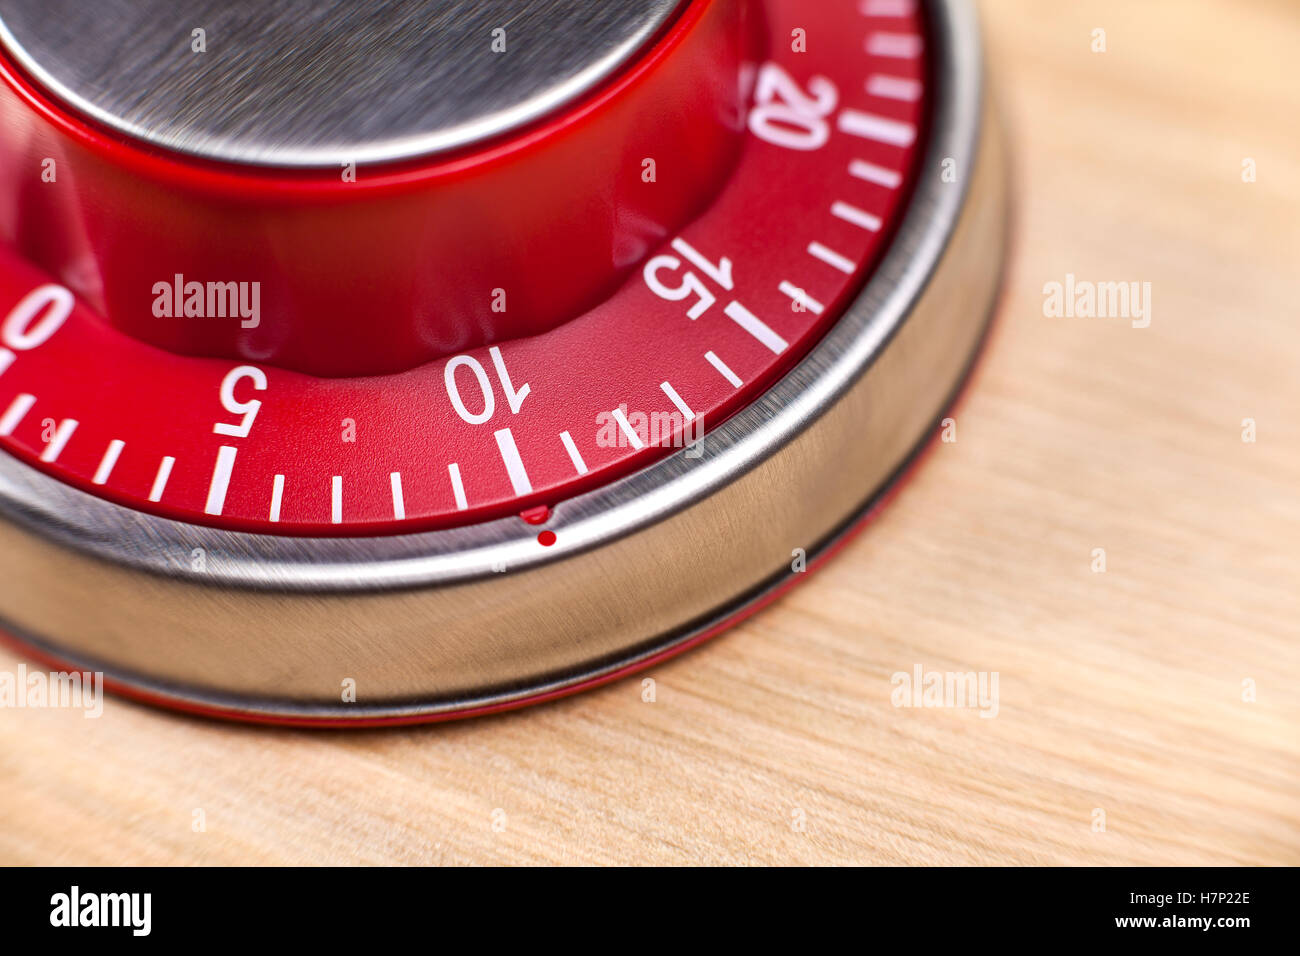 Macro view of a red kitchen egg timer showing 10 minutes on wooden background Stock Photo